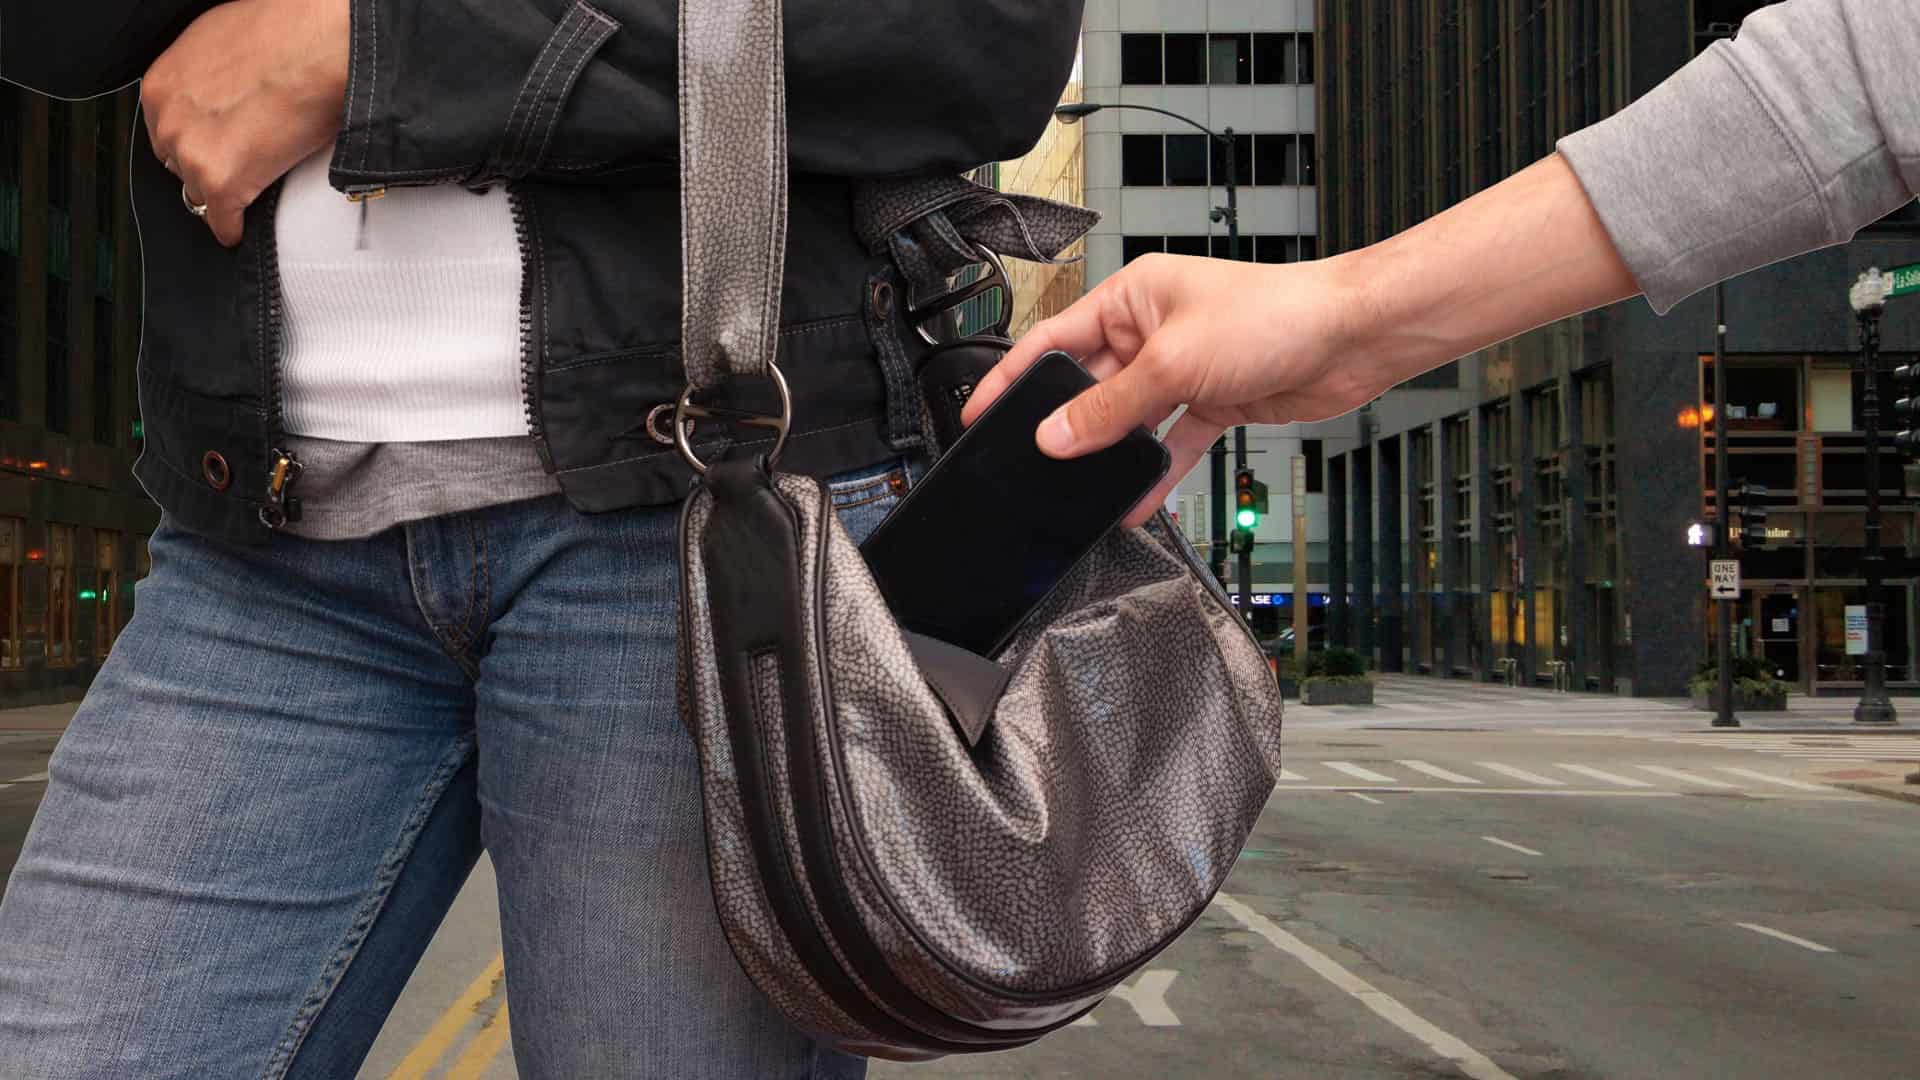 UK Police Circumvent iOS Encryption By Snatching iPhone Out of Suspect’s Hands